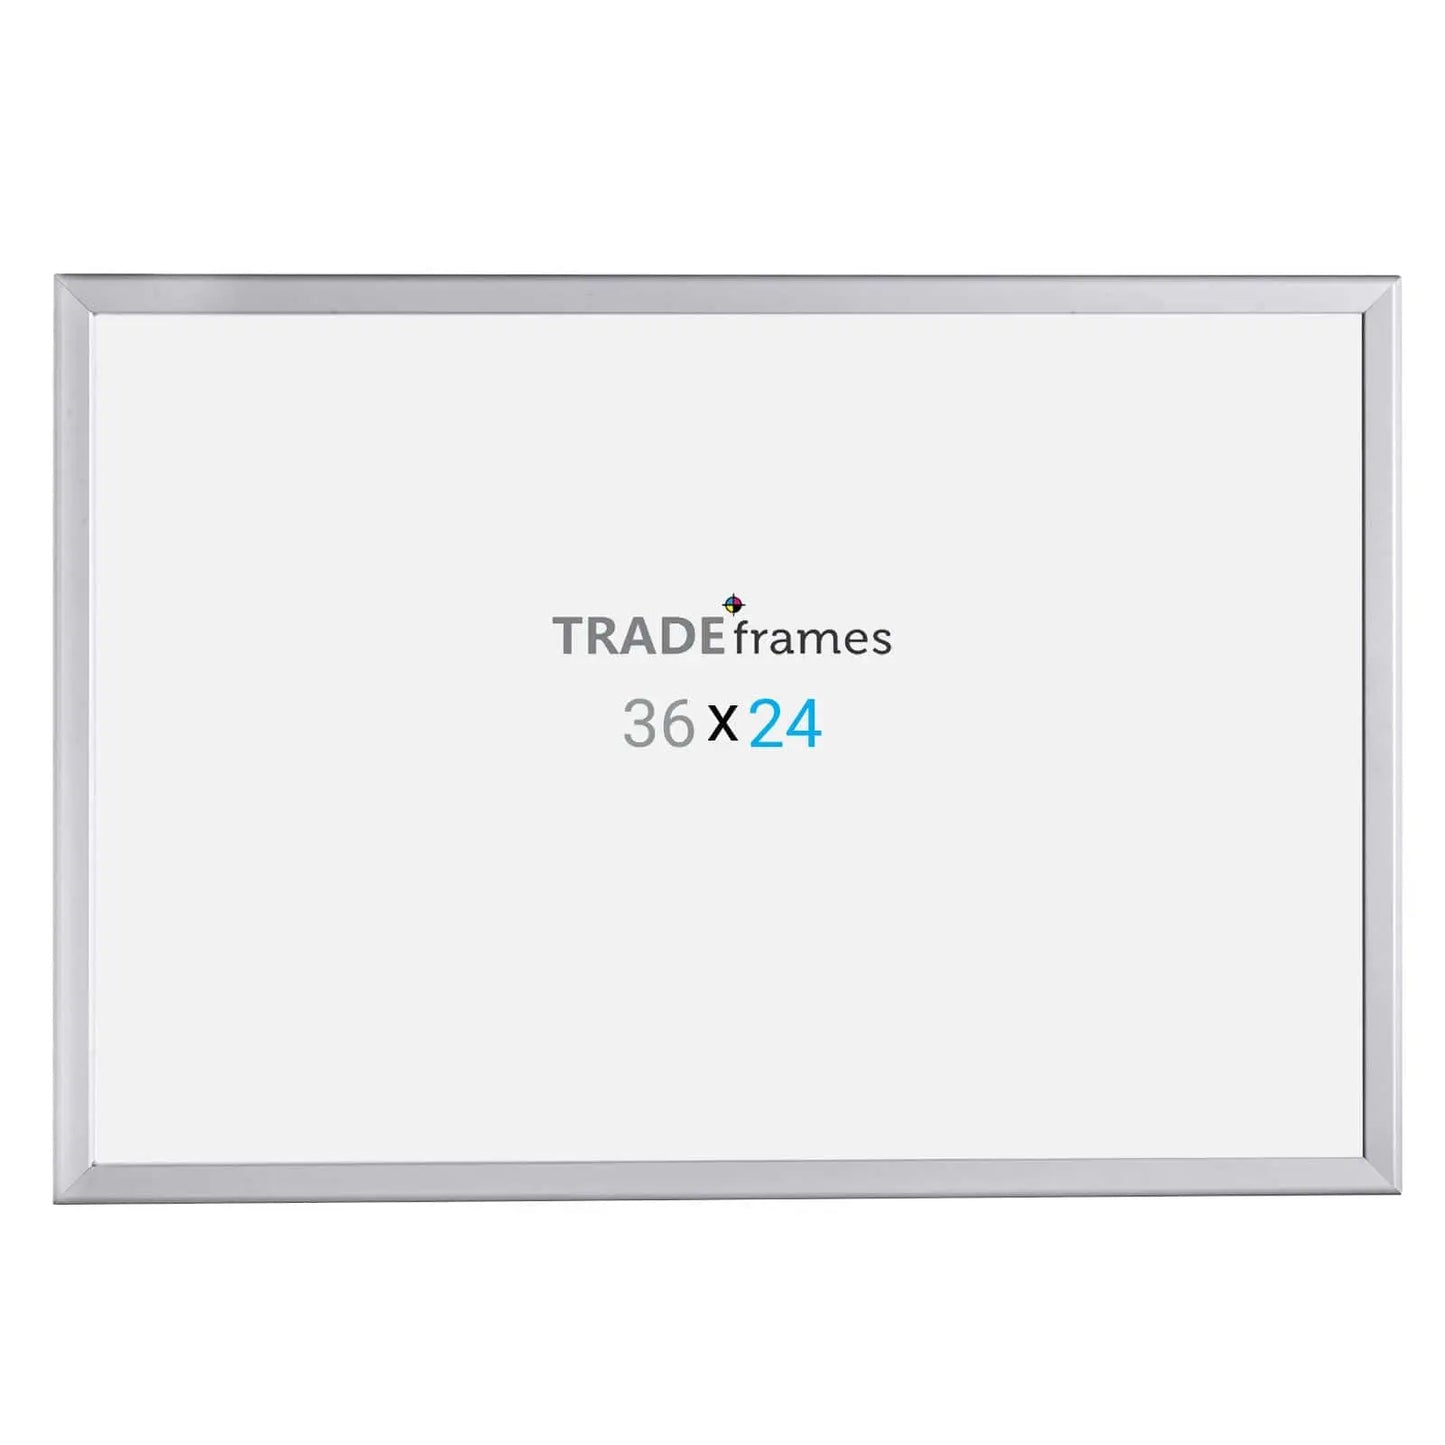 Seco 24 in. x 36 in. Silver Rounded Corners Snap Frame